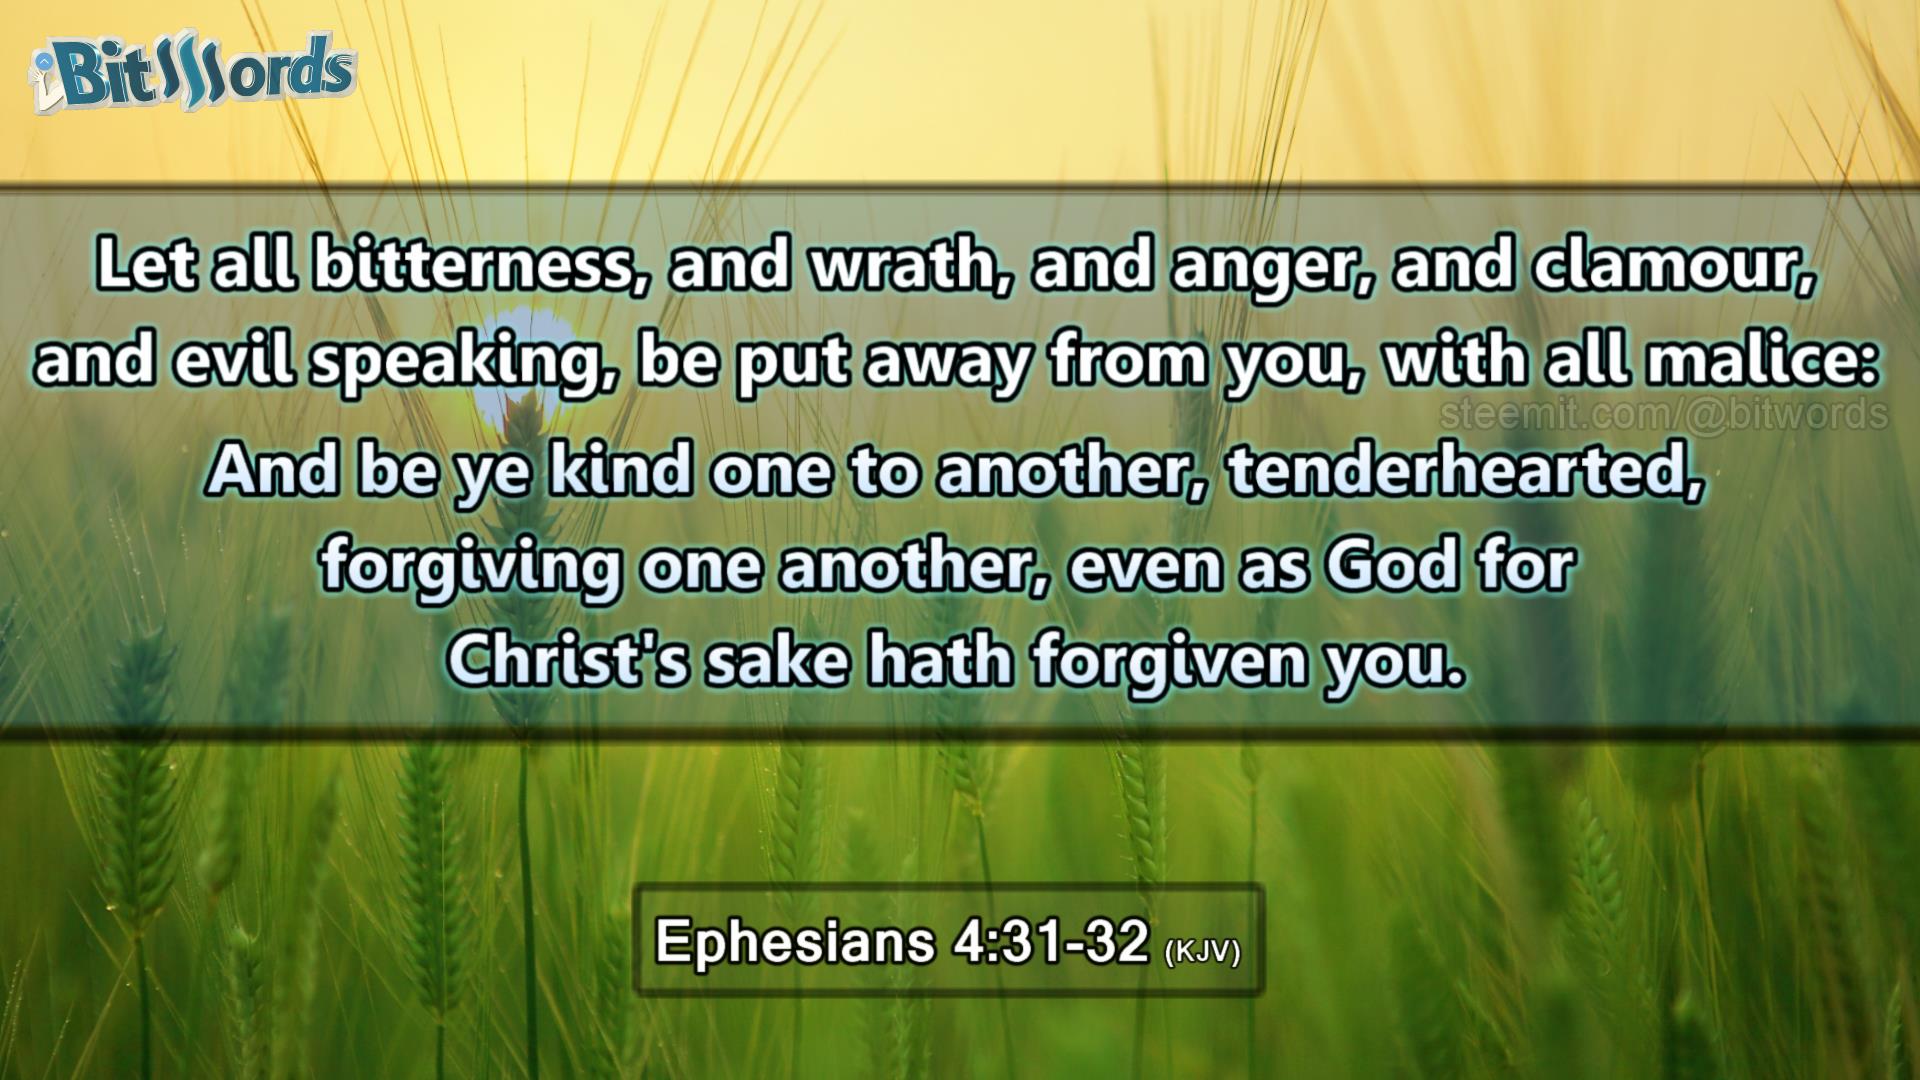 bitwords steemit bible verse of the day ephesians 3 31 32 let all bitterness and wrath and anger an clamour and evil speaking  be put away from you with all malice and be kind one to another forgiving one another even as god for s.jpg